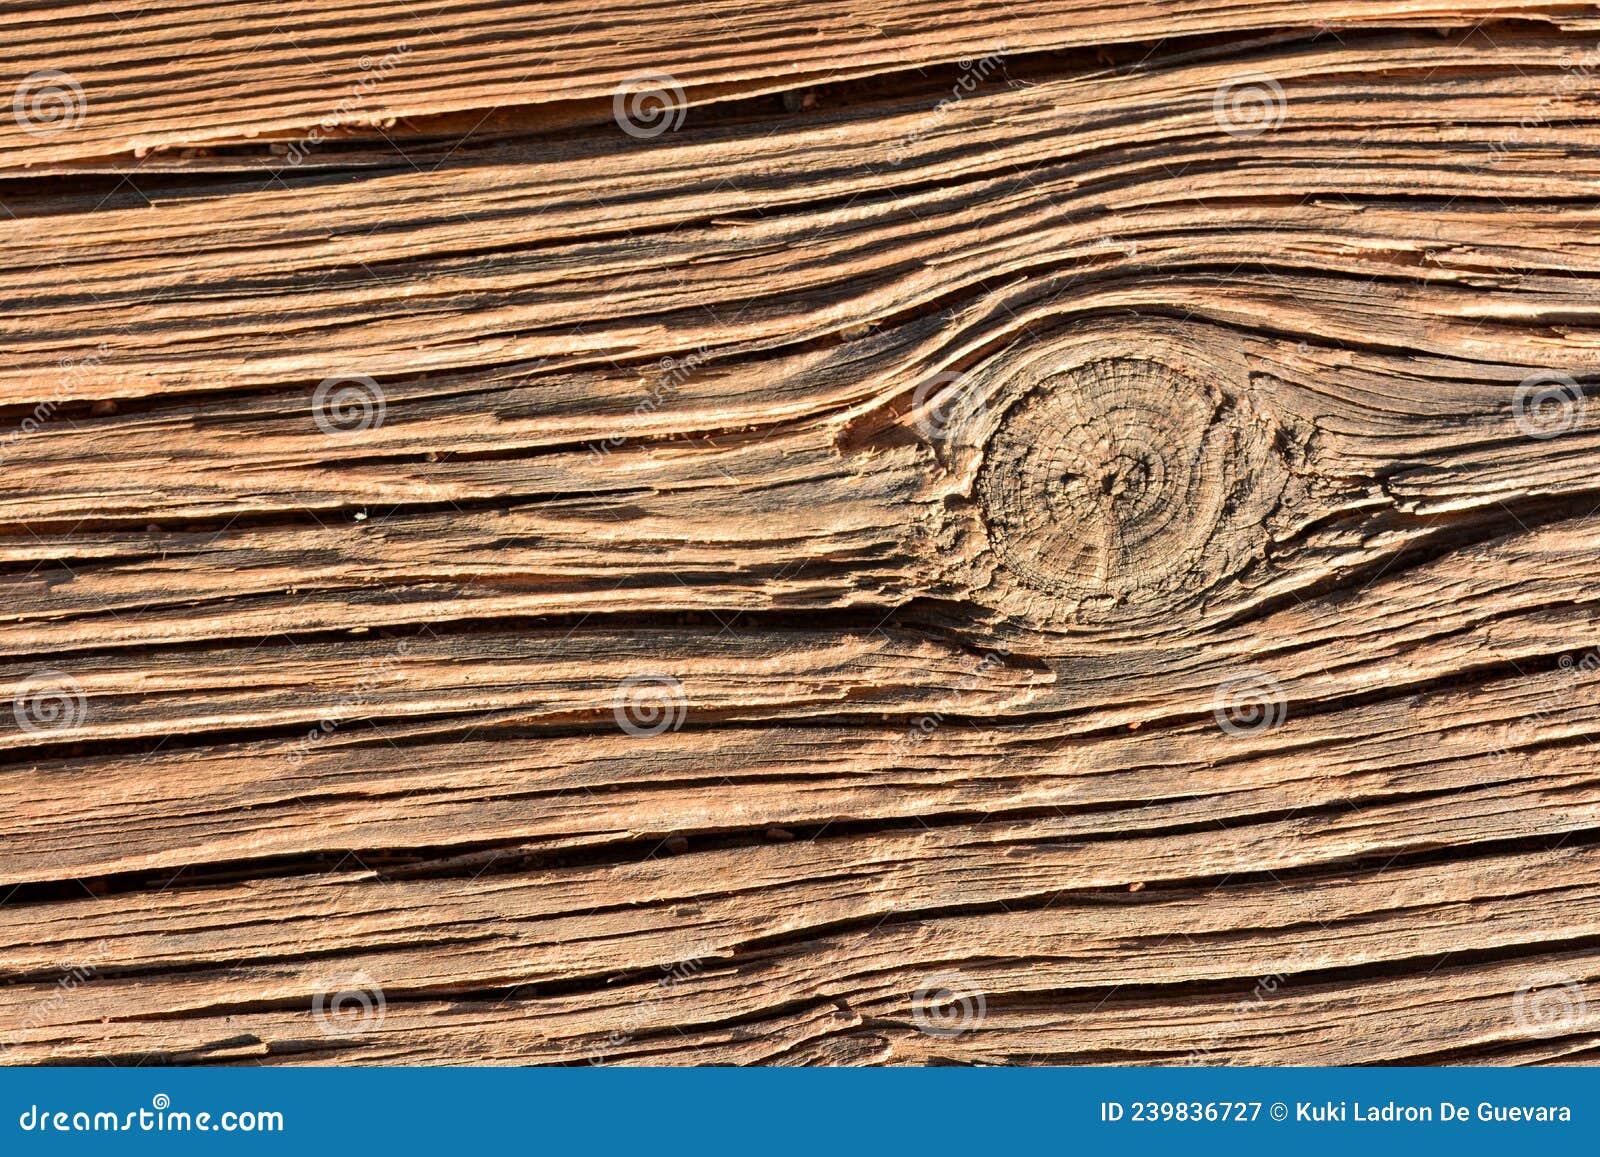 detail of the grain of an old wooden boardd